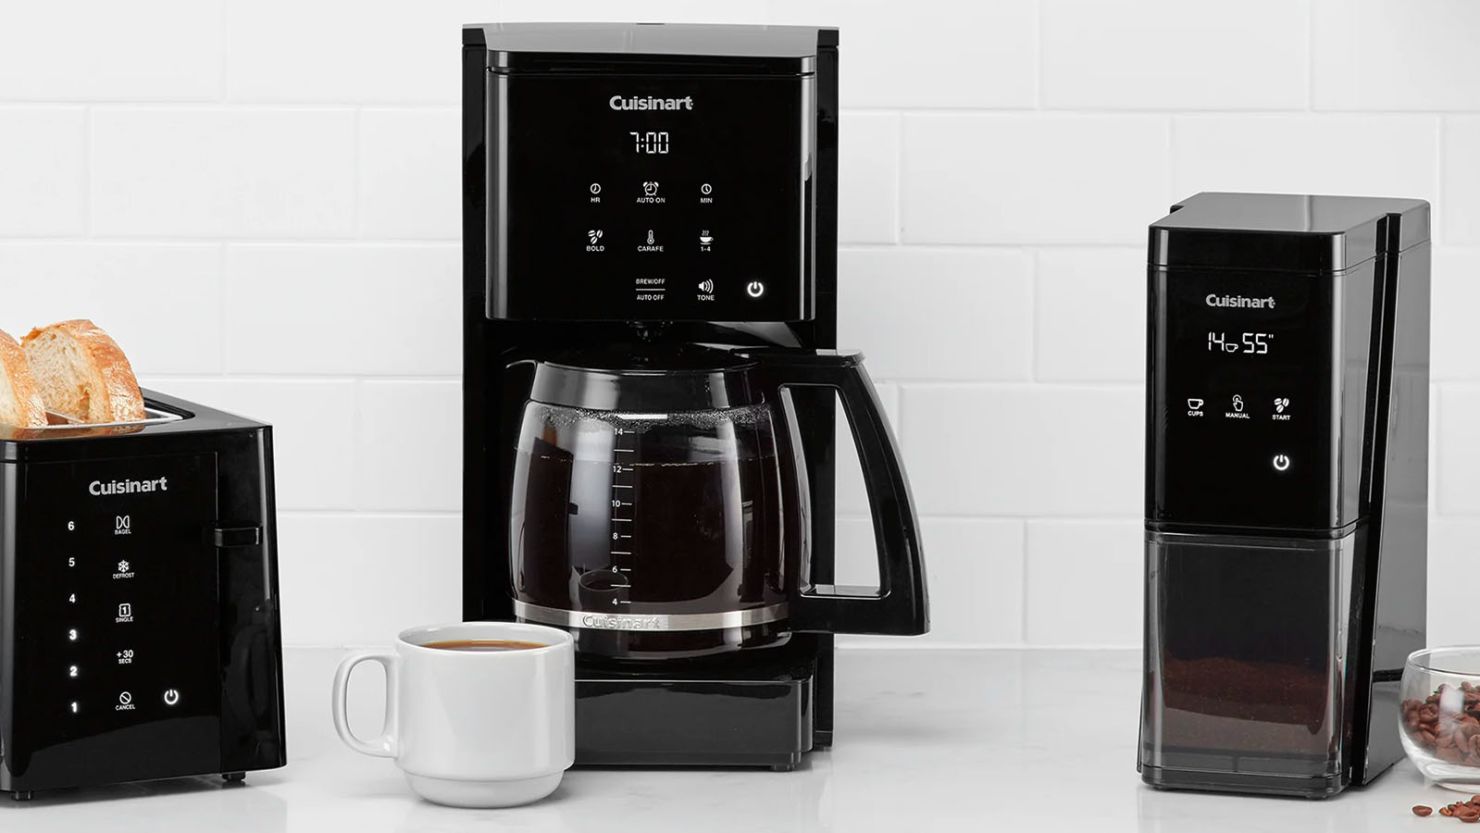  Touchscreen Coffee Maker, 14-Cup Programmable Coffee